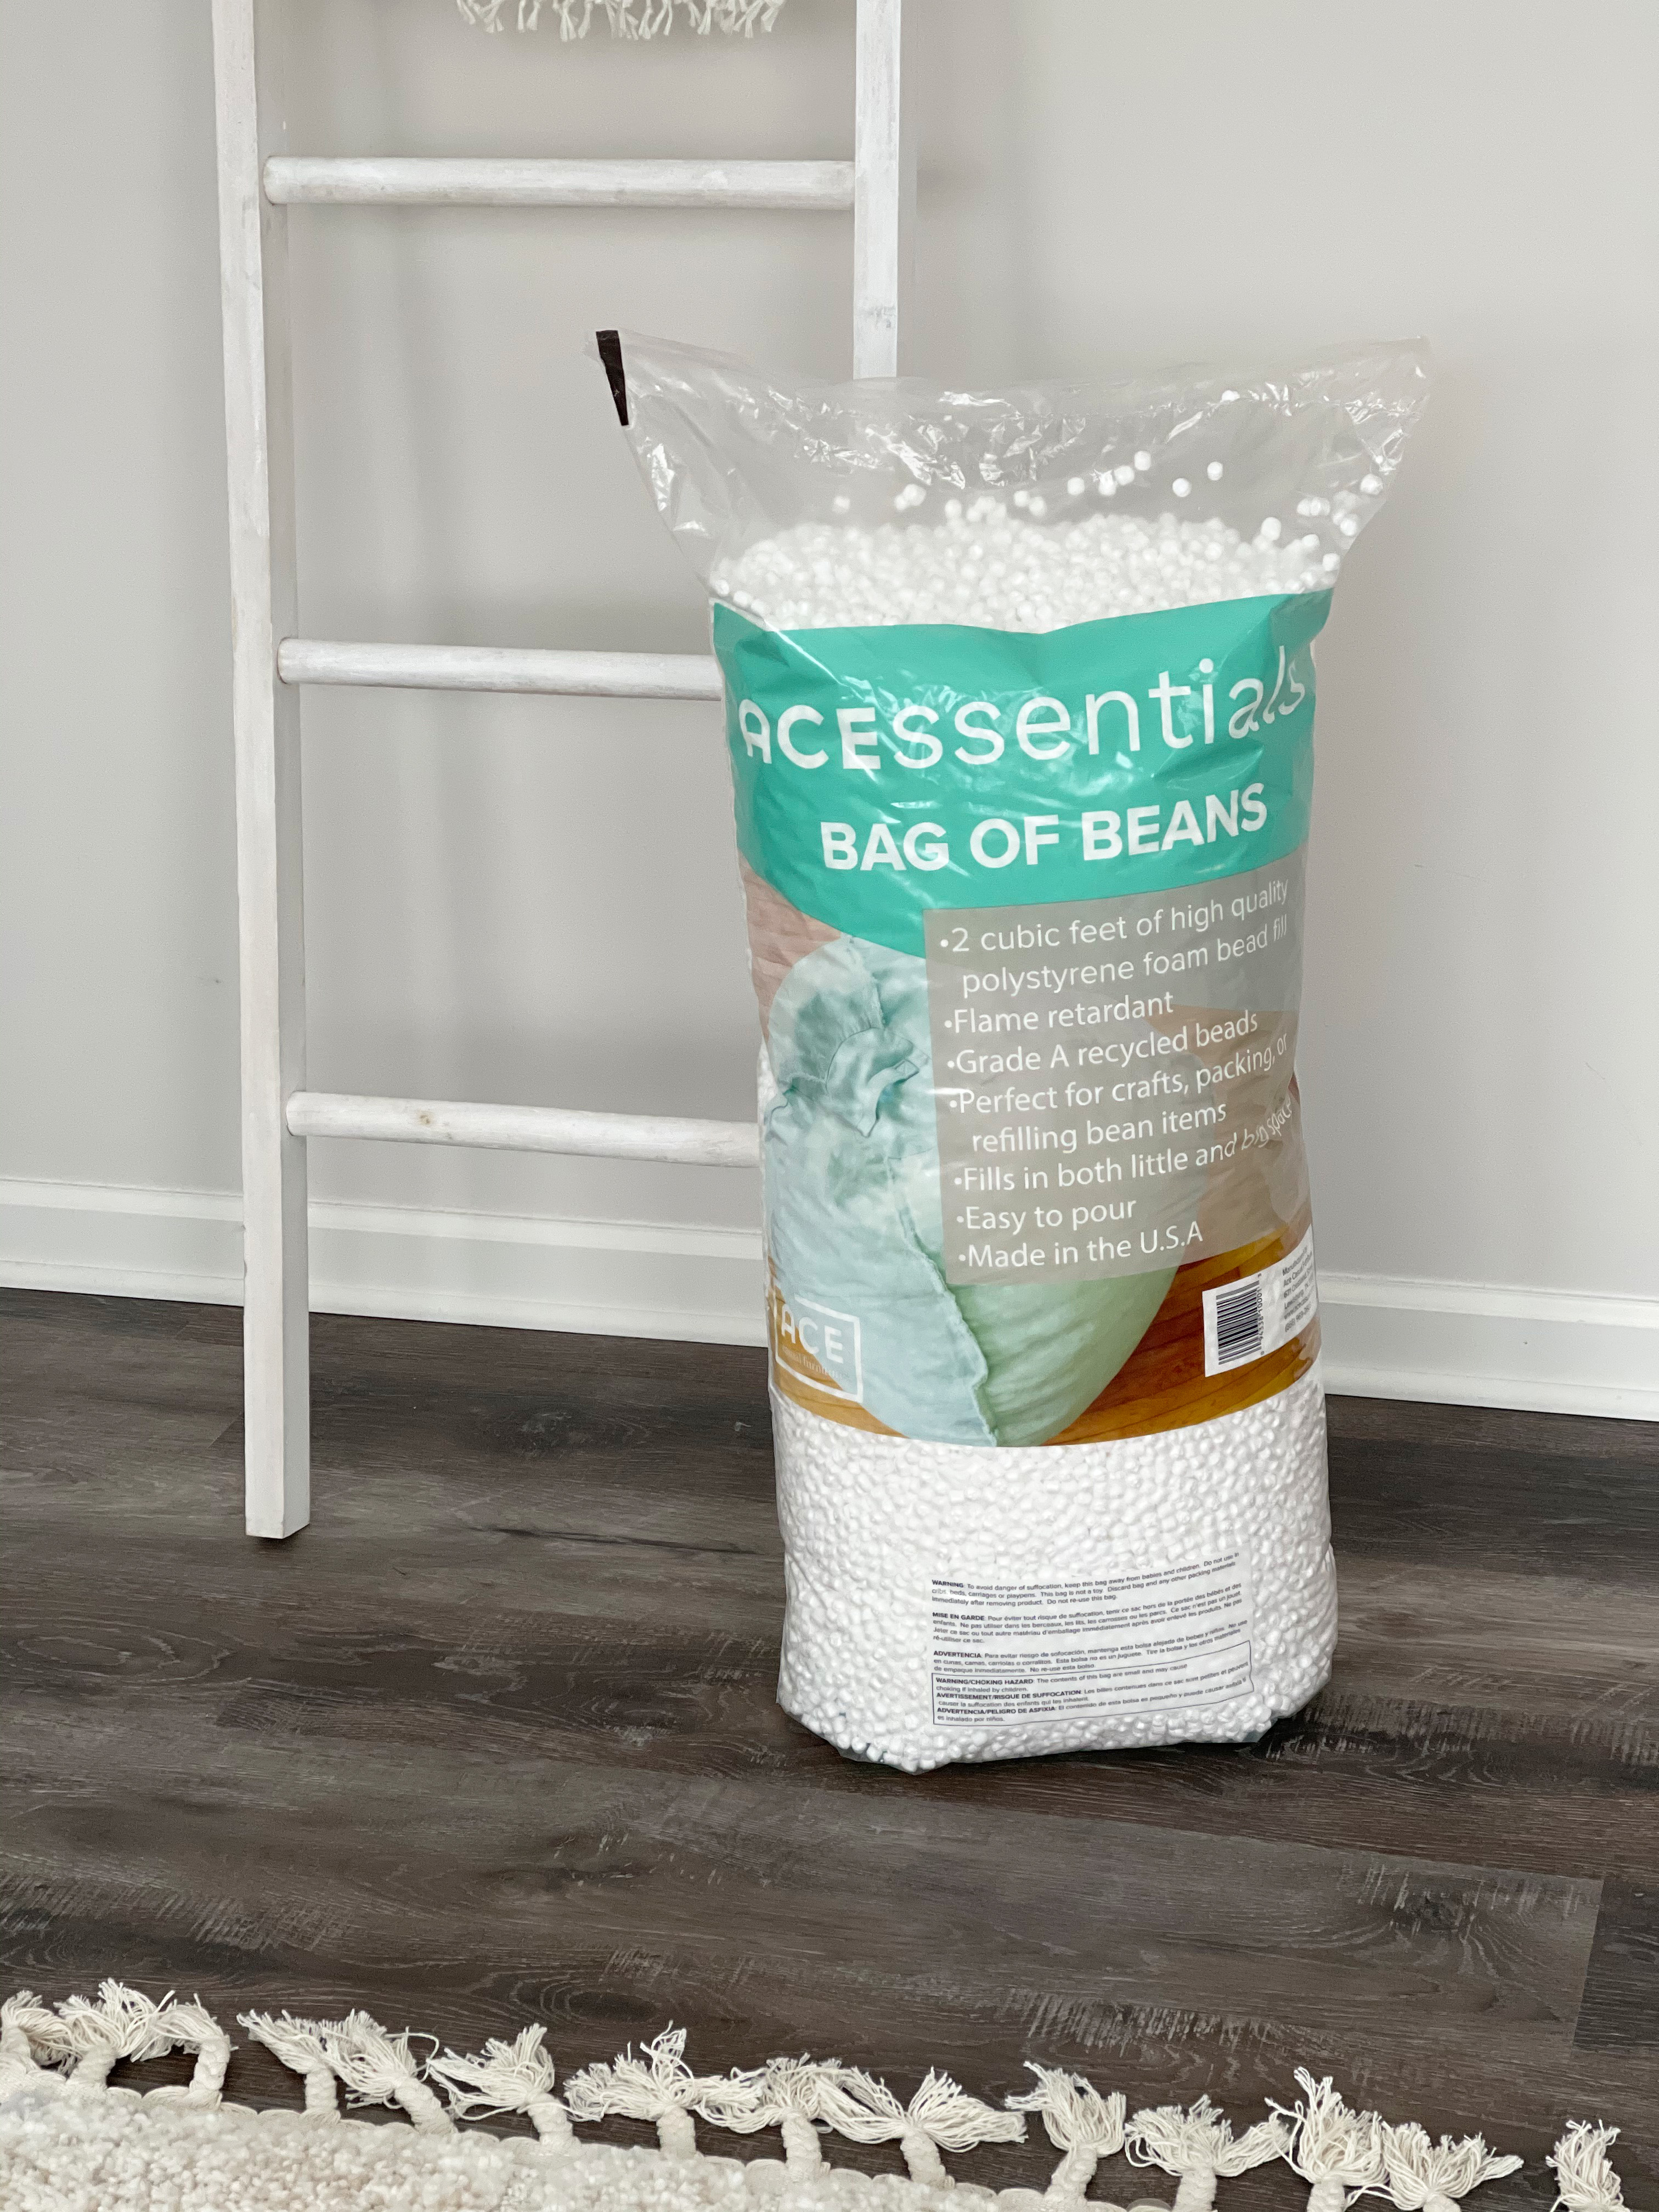 ACEssentials Polystrene Bean Refill for Crafts and Filler for Bean Bag  Chairs, 50 liters, 2 cubic feet